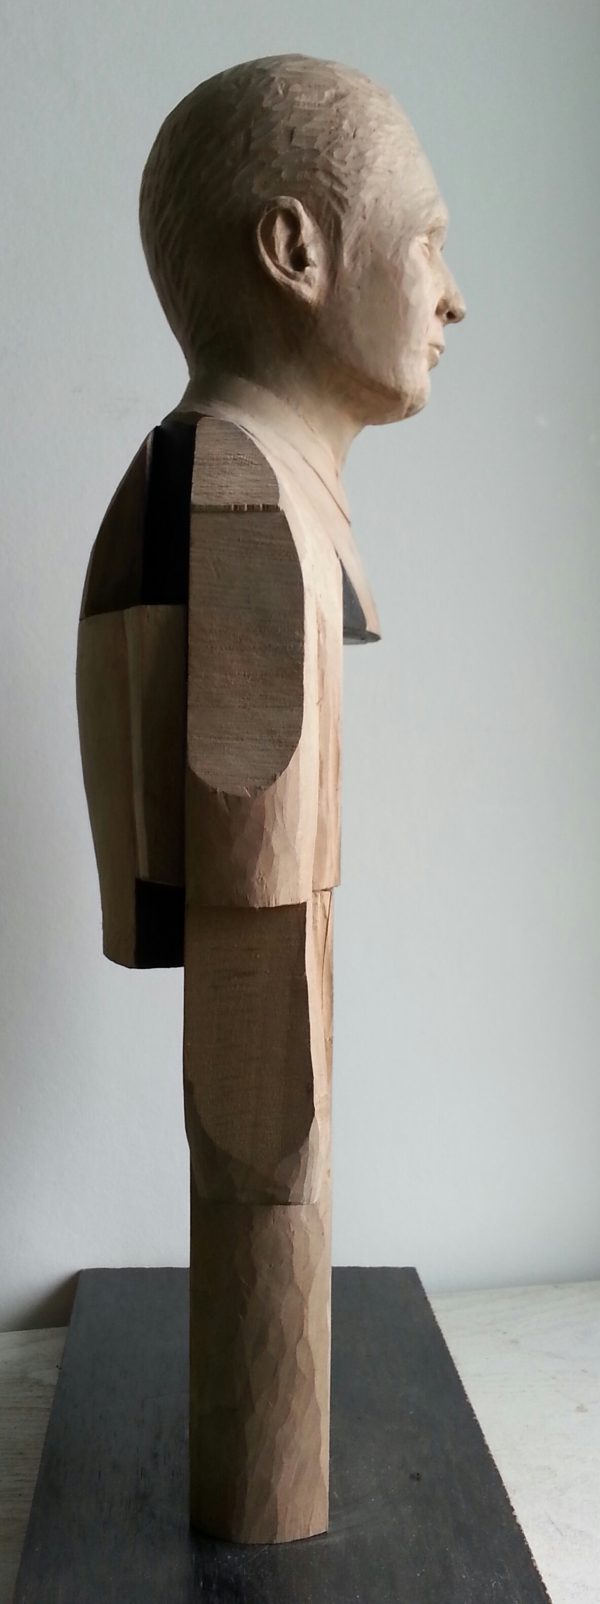 Smoking Man. Lime wood carving with paper and graphite by Lee Devonish, 2015.